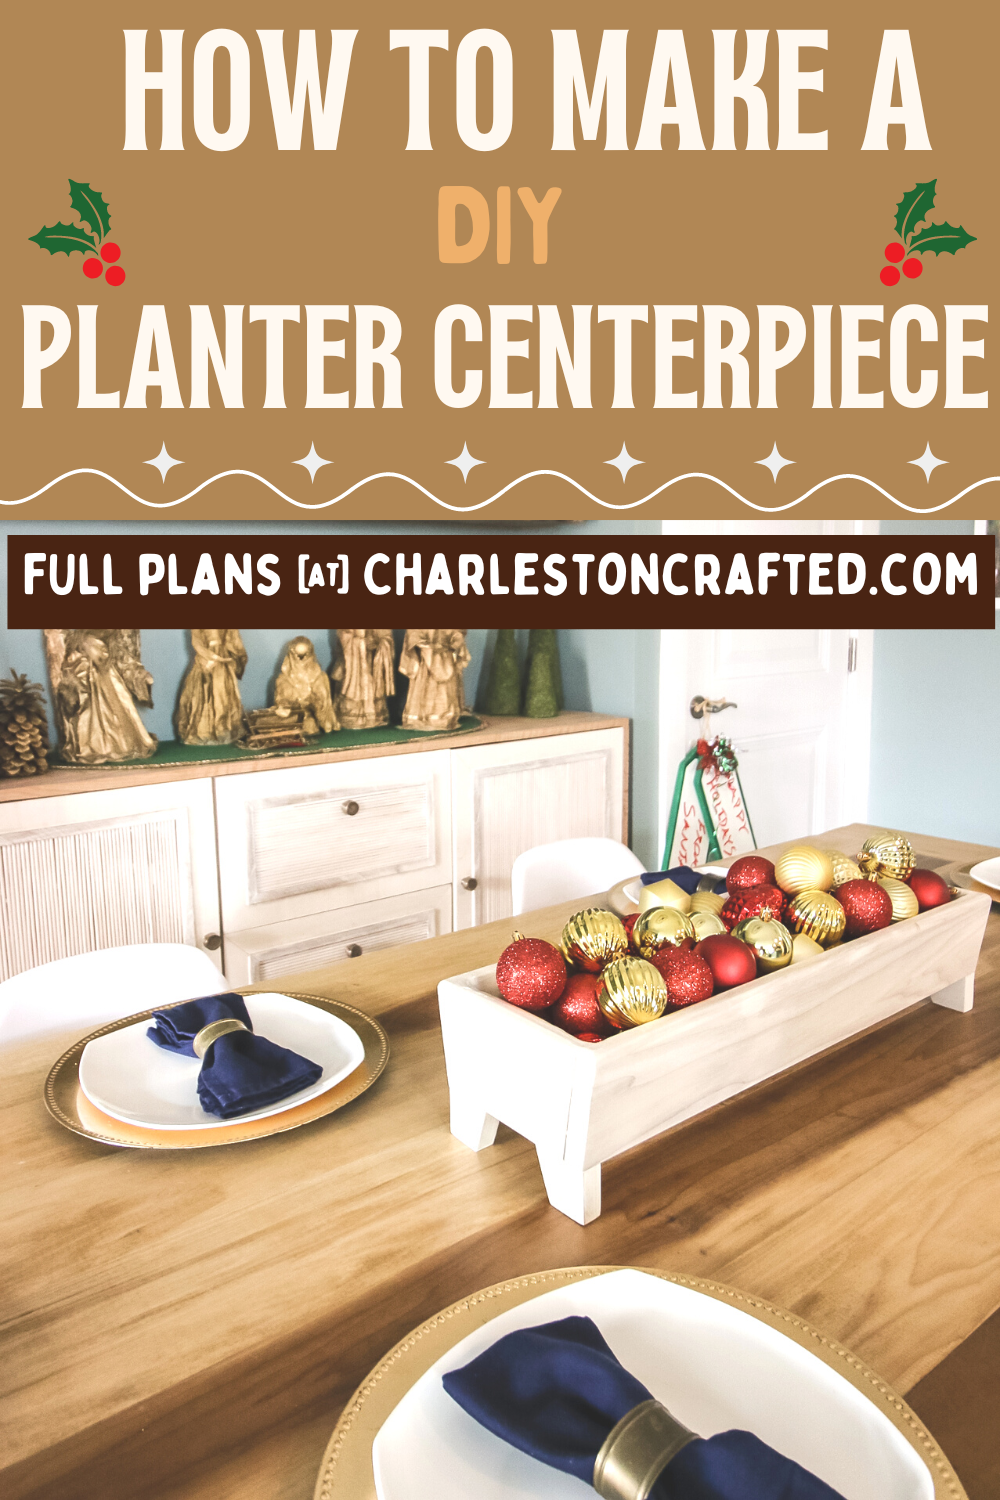 https://www.charlestoncrafted.com/wp-content/uploads/2022/12/DIY-planter-centerpiece-pin-image.png